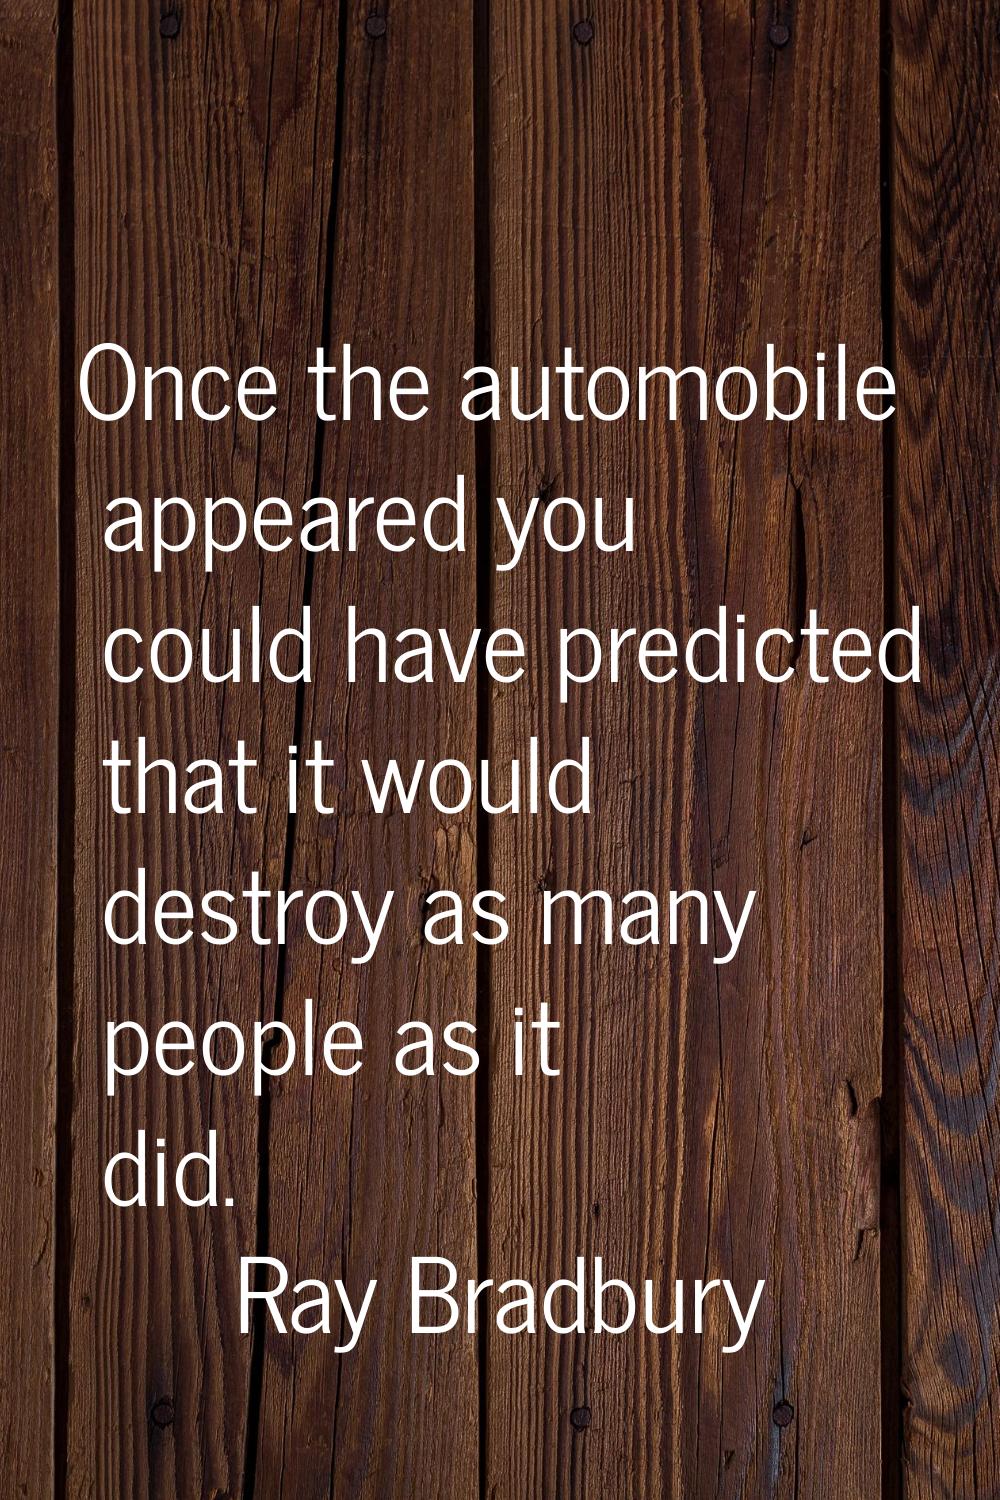 Once the automobile appeared you could have predicted that it would destroy as many people as it di